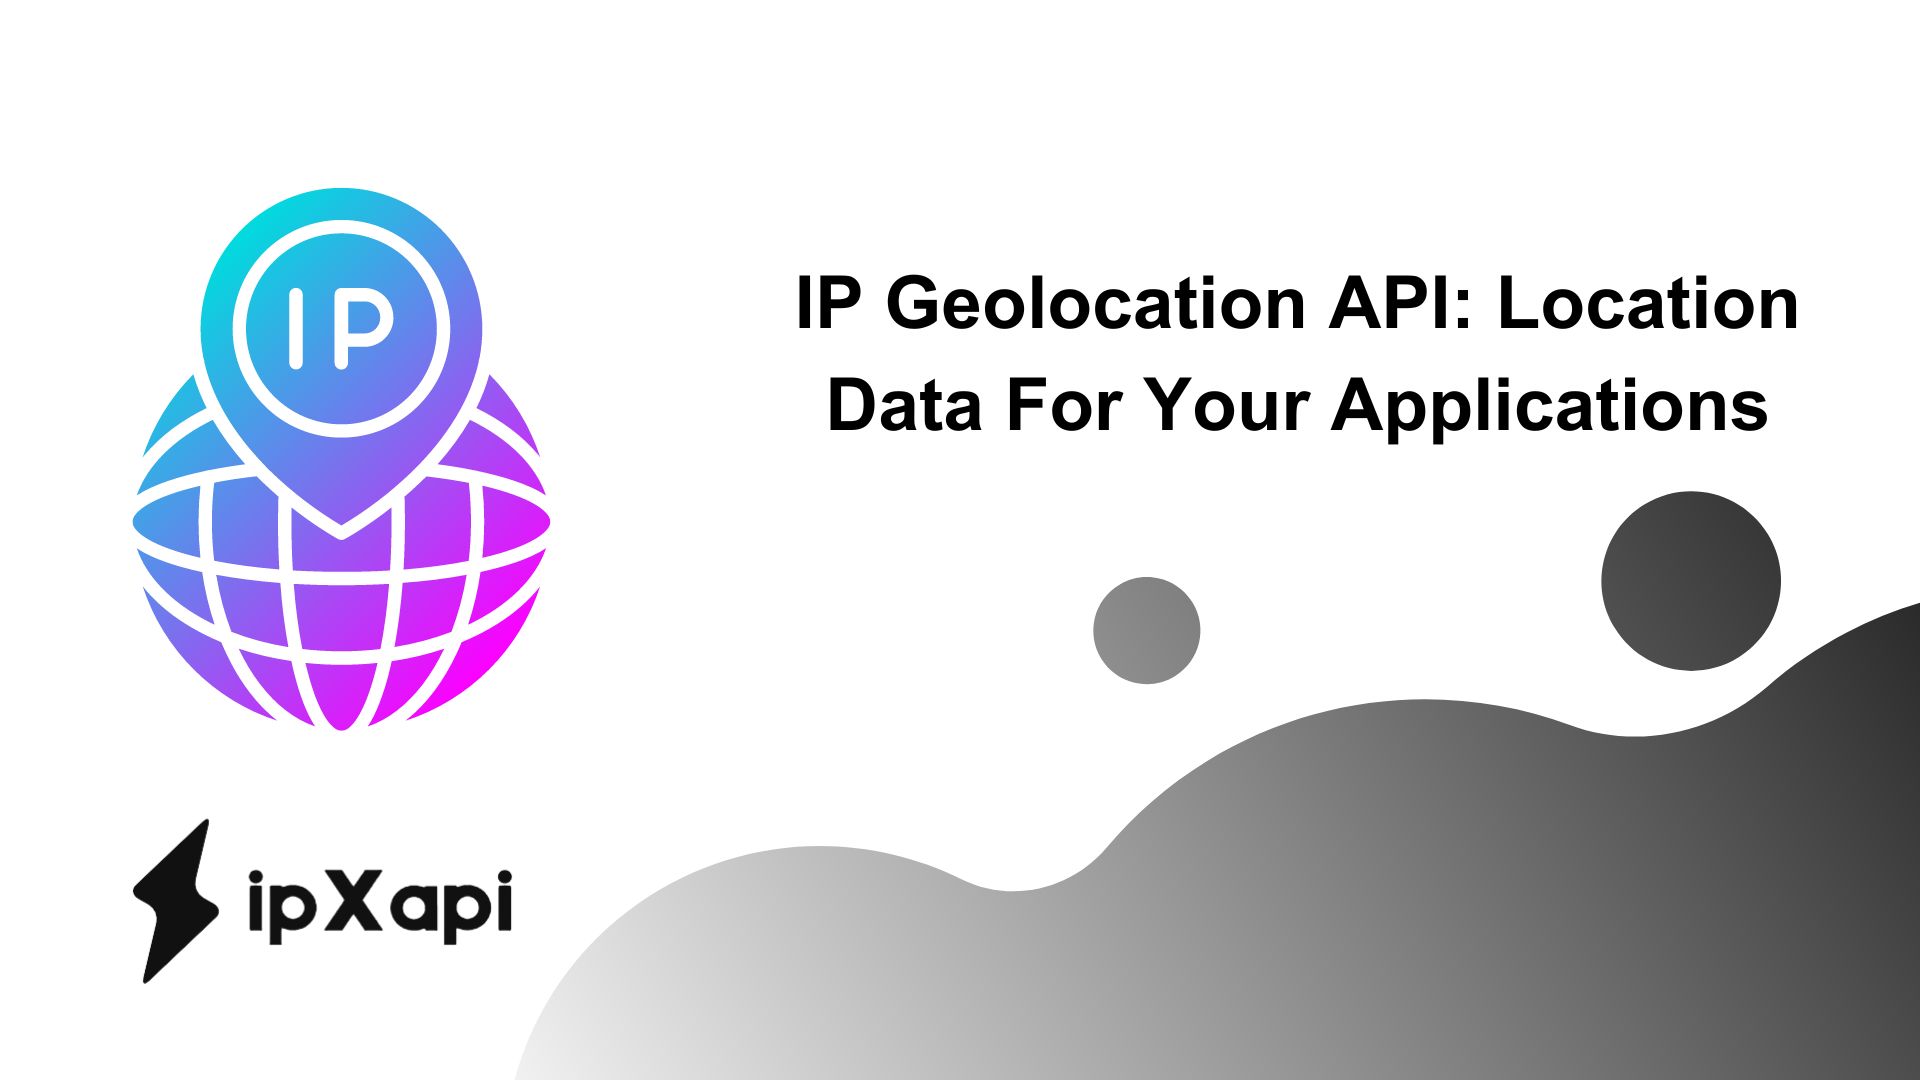 IP Geolocation API: Location Data For Your Applications